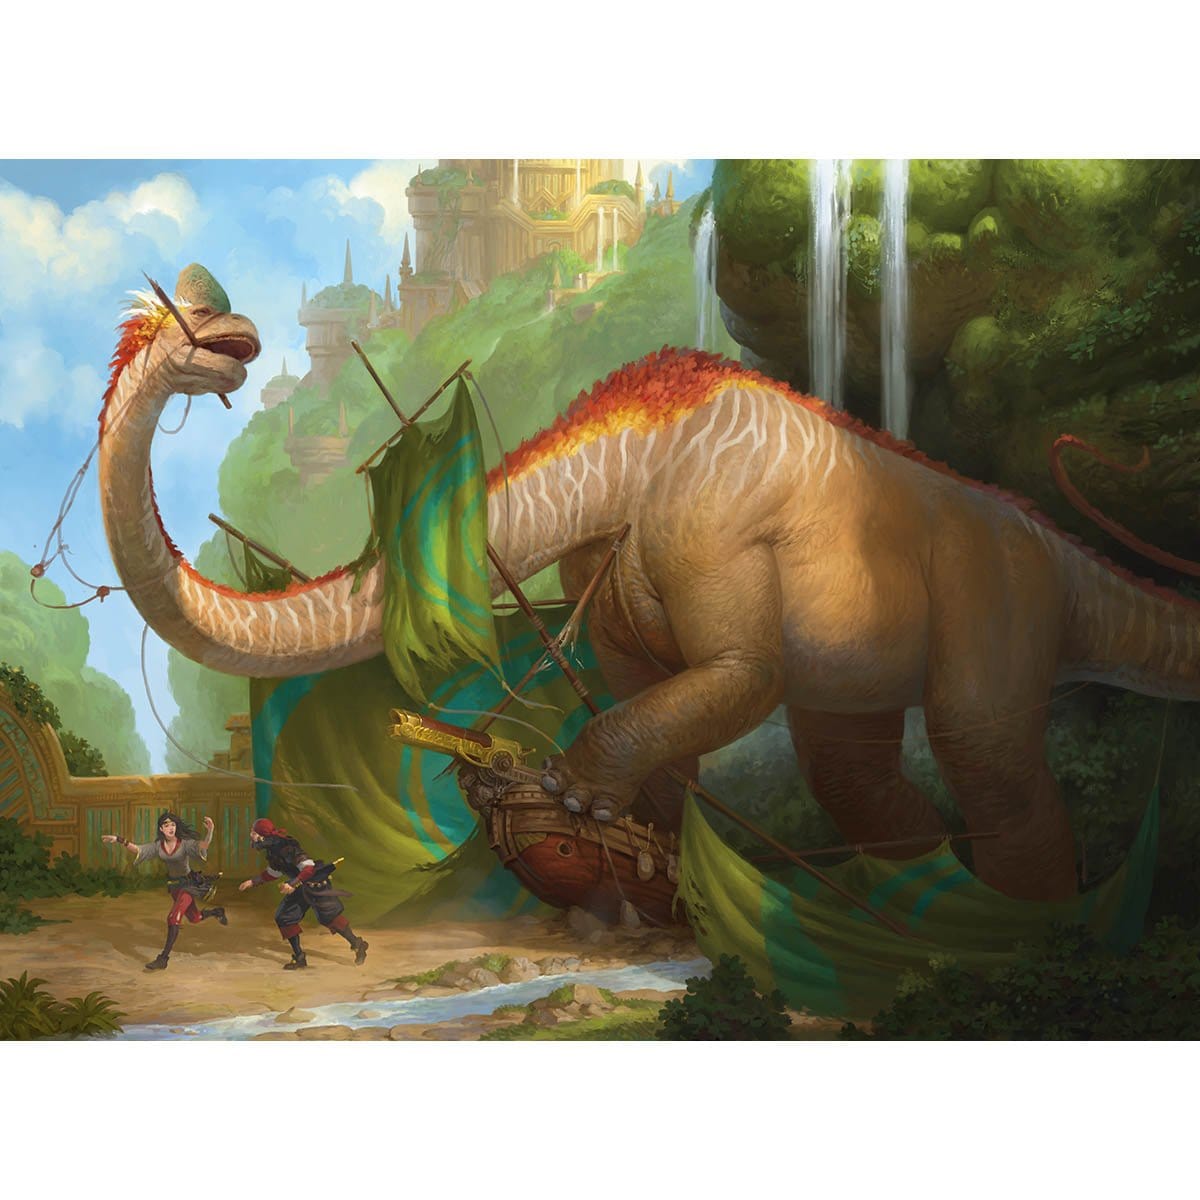 Thrashing Brontodon Print - Print - Original Magic Art - Accessories for Magic the Gathering and other card games